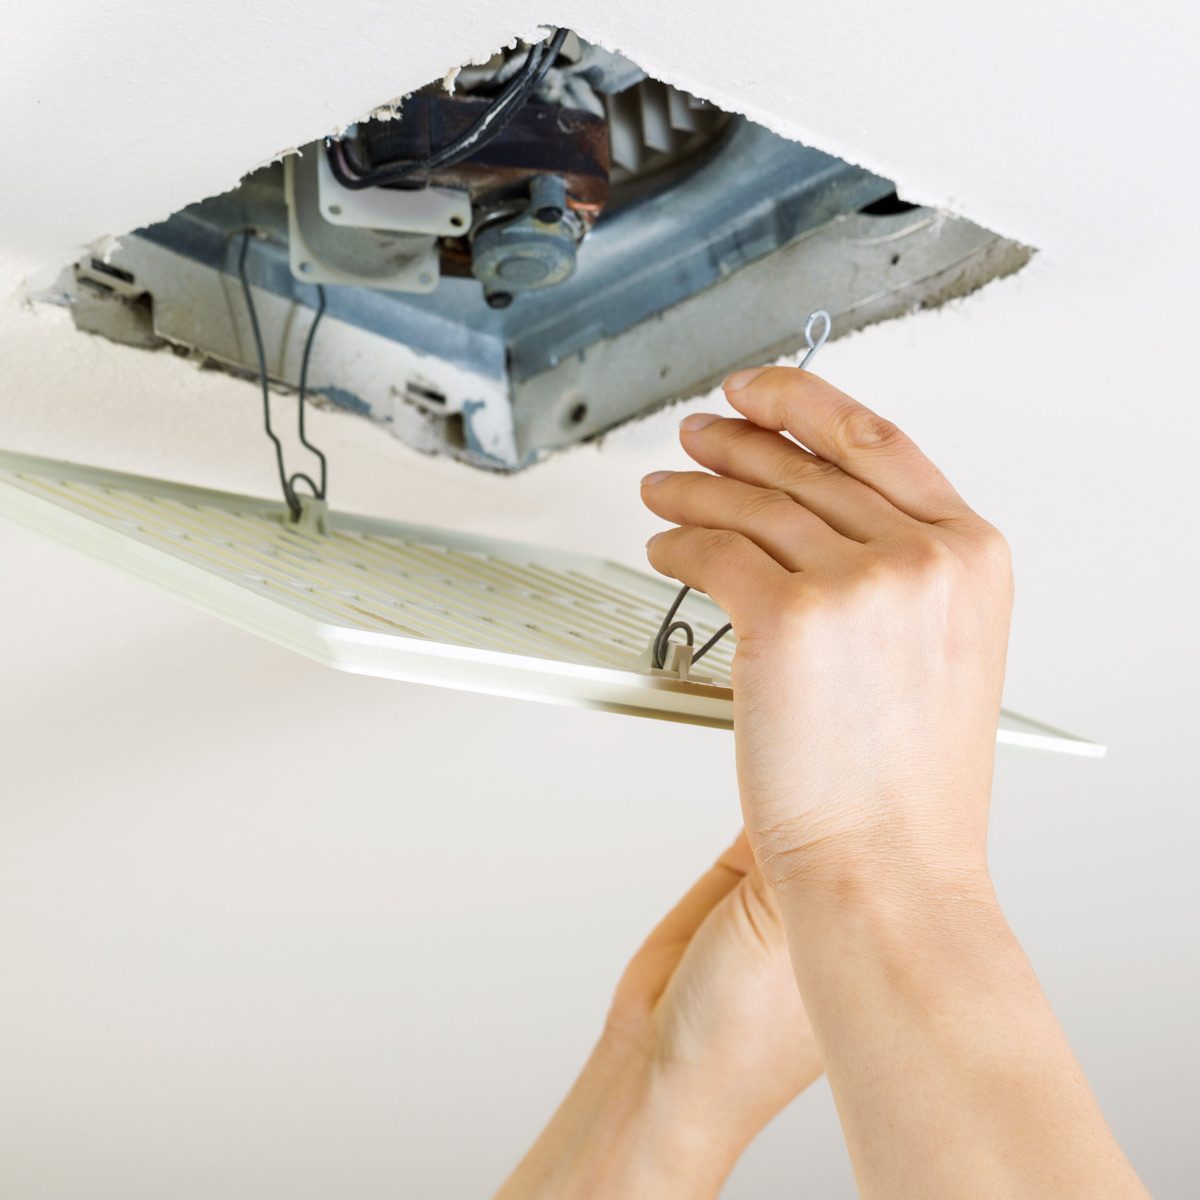 How To Clean A Bathroom Exhaust Fan, How To Take Off Bathroom Vent Light